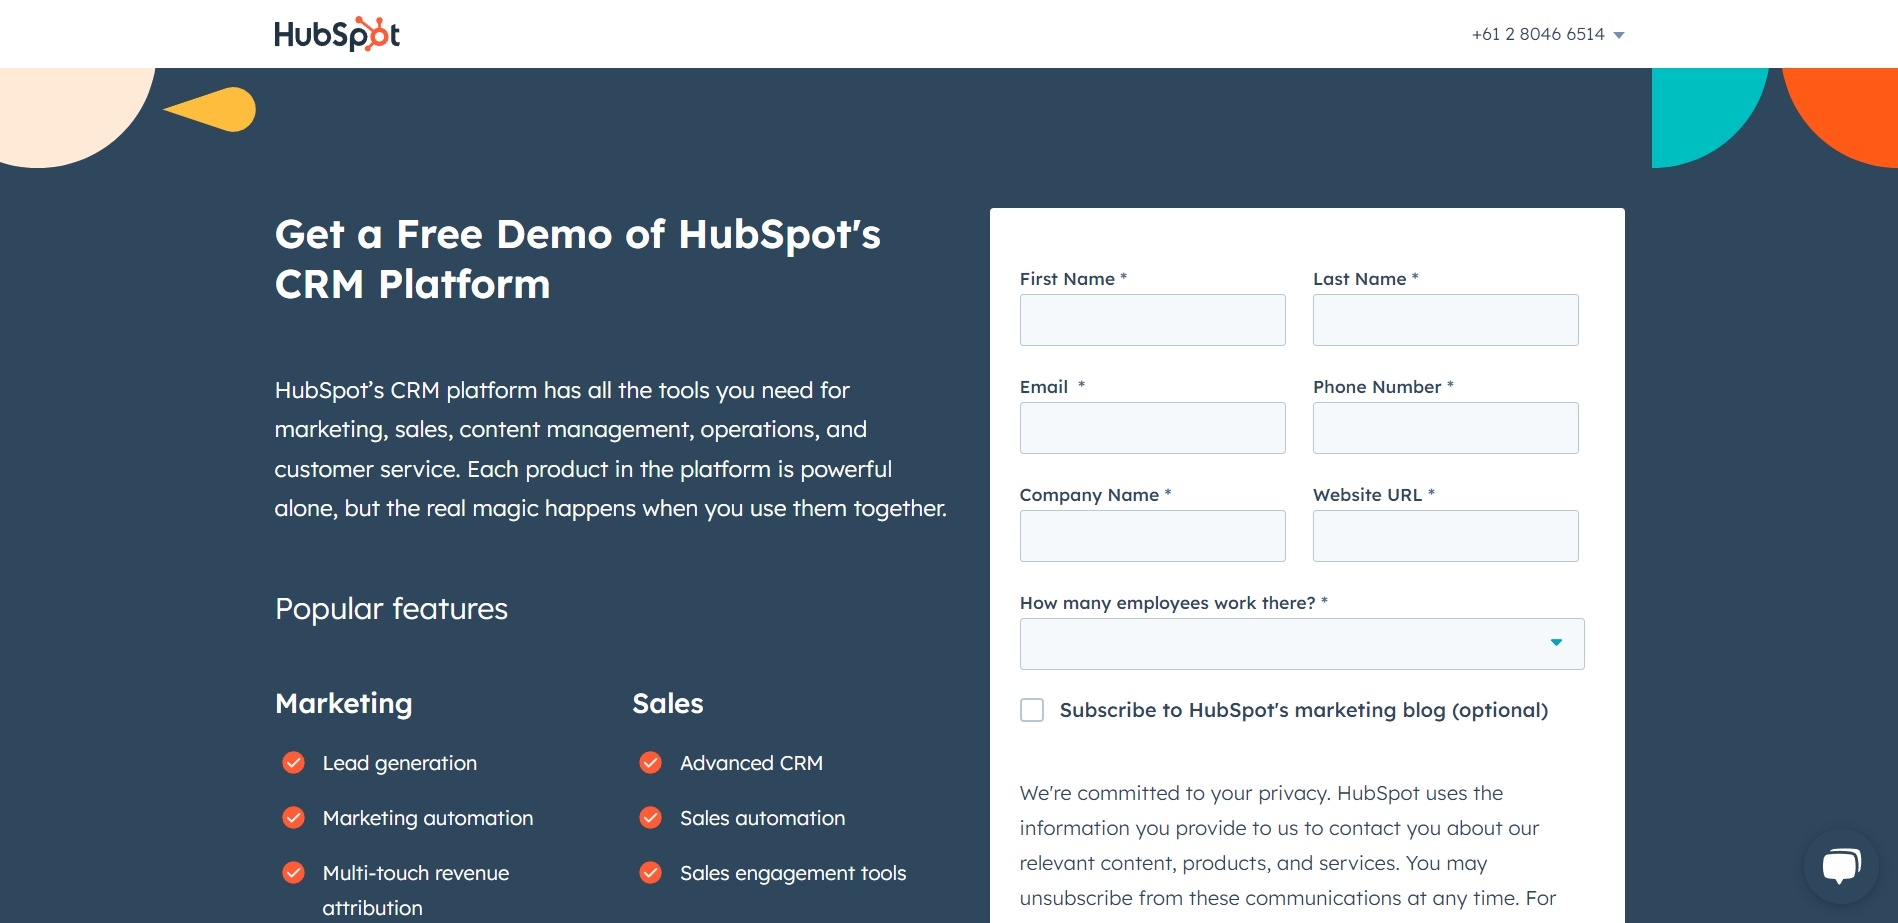 Hubspot’s email sign up offers a free demo of their CRM platform